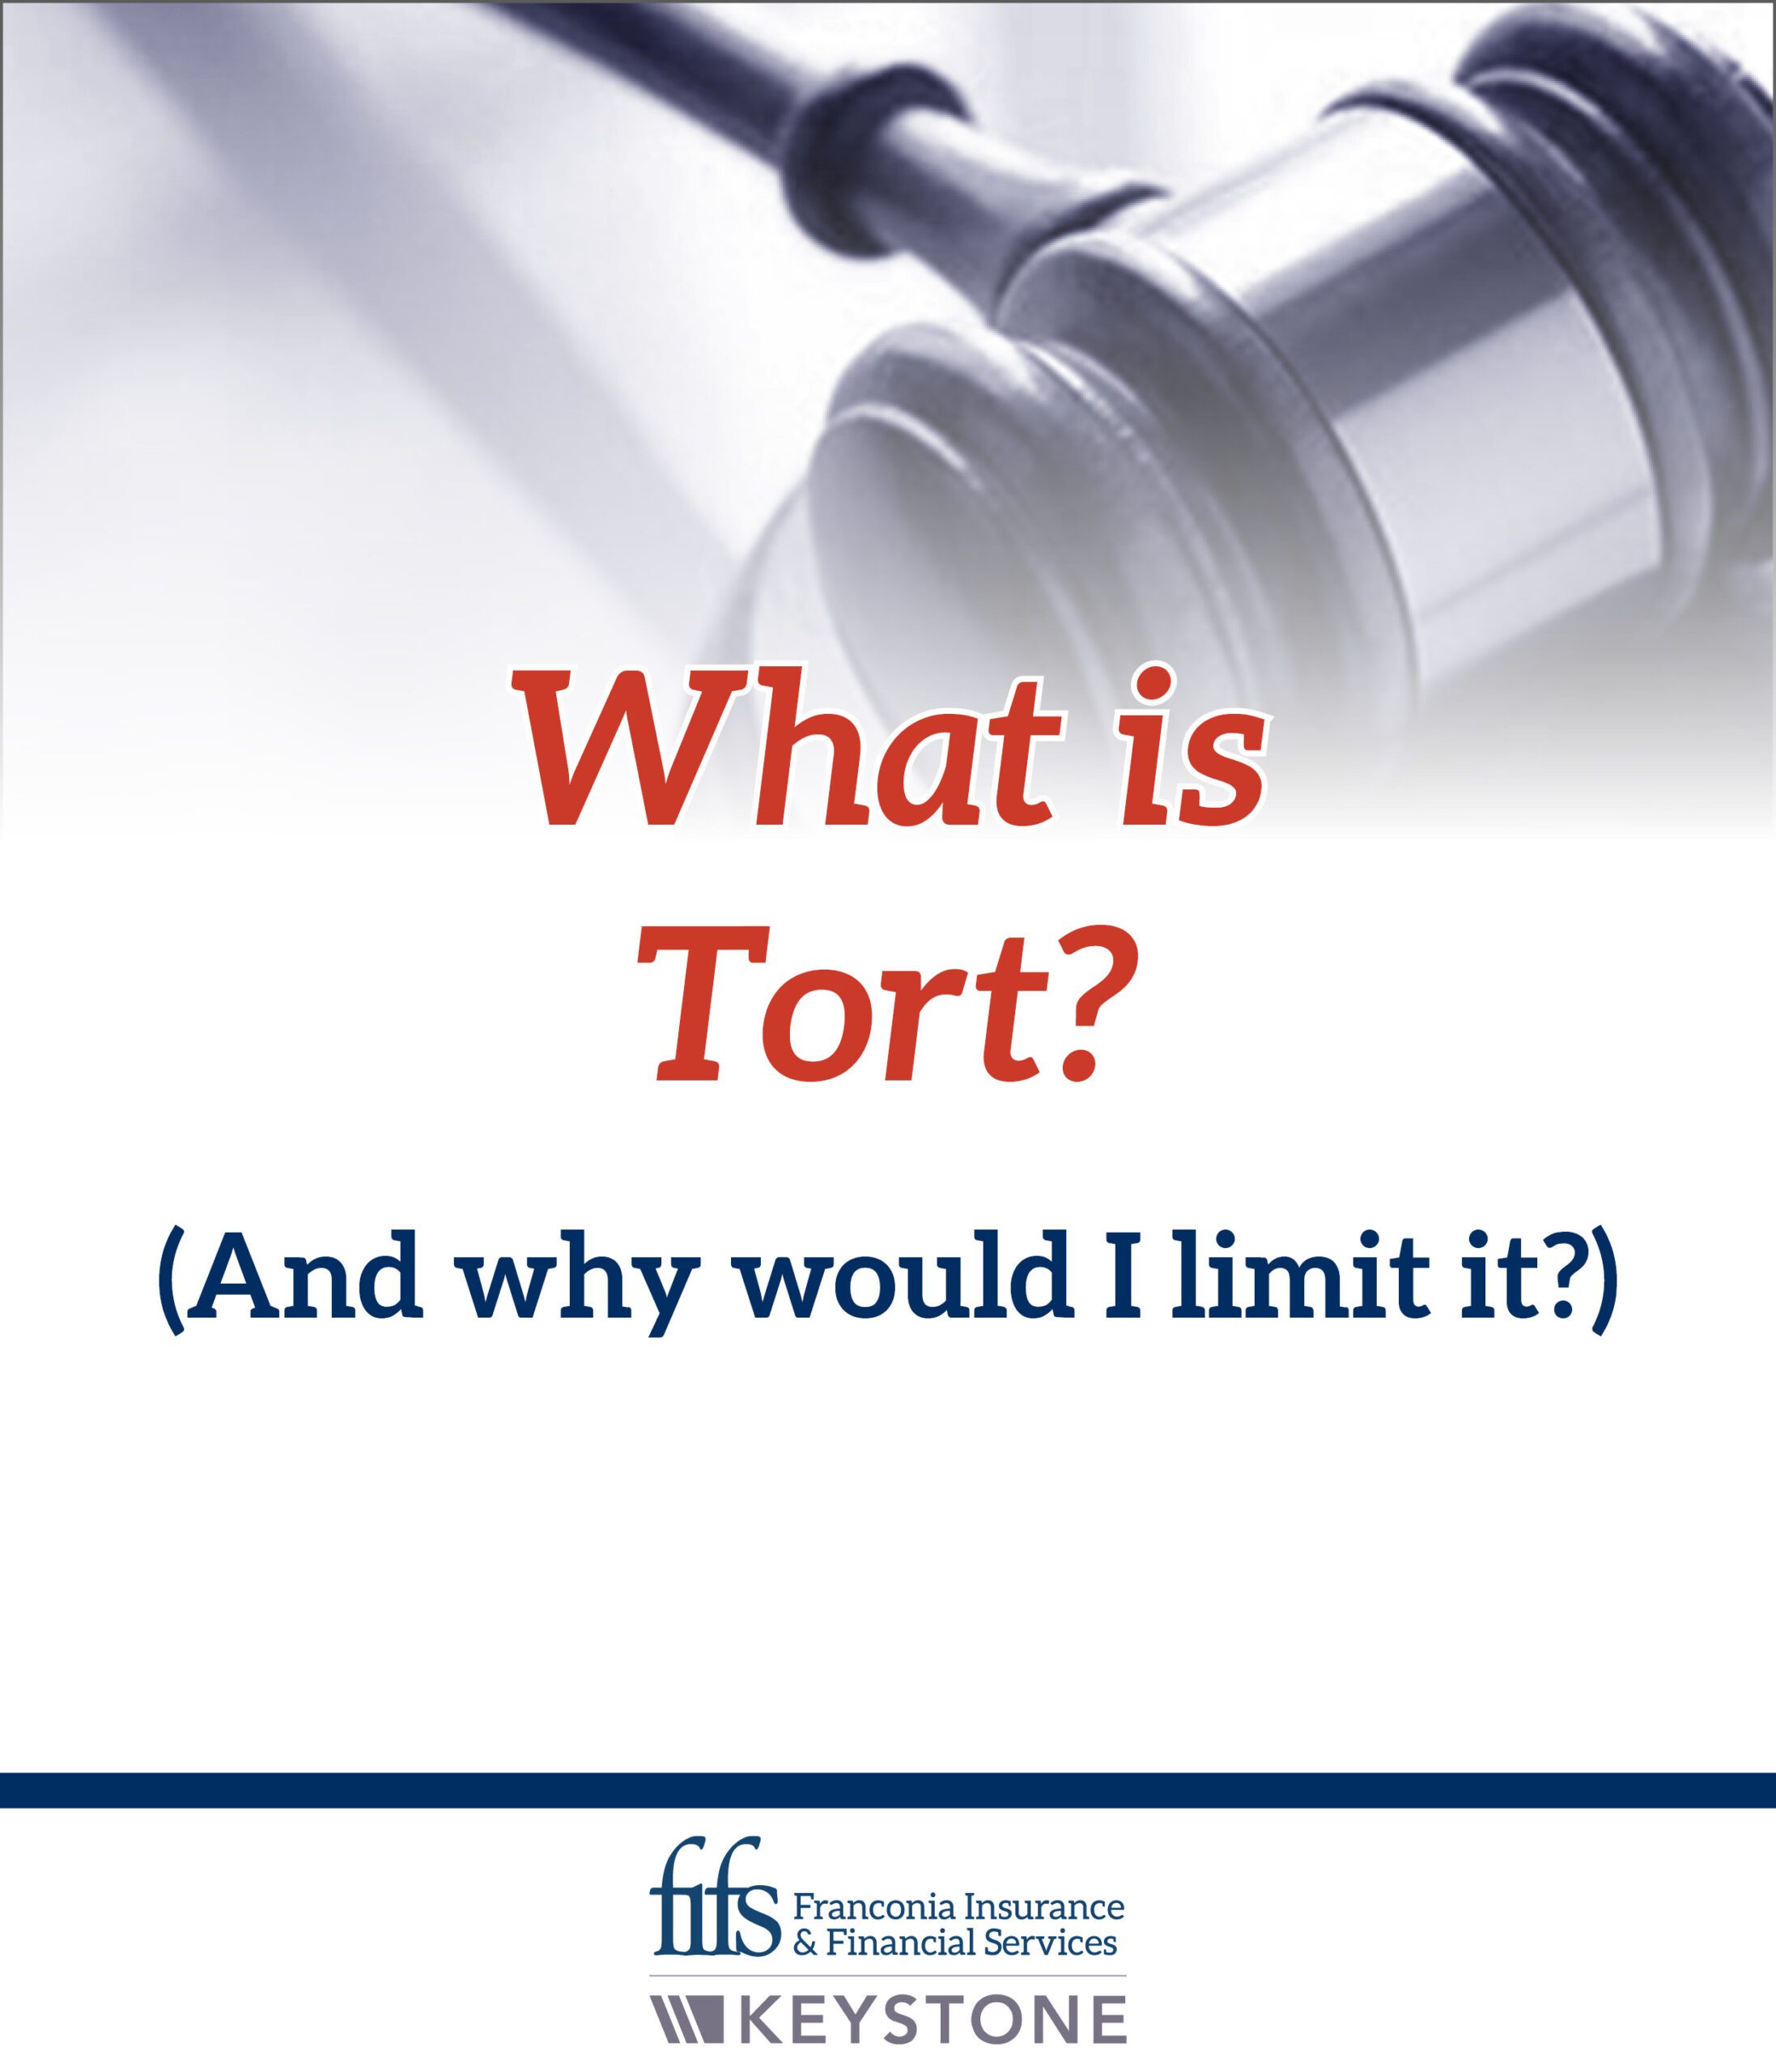 What is tort?